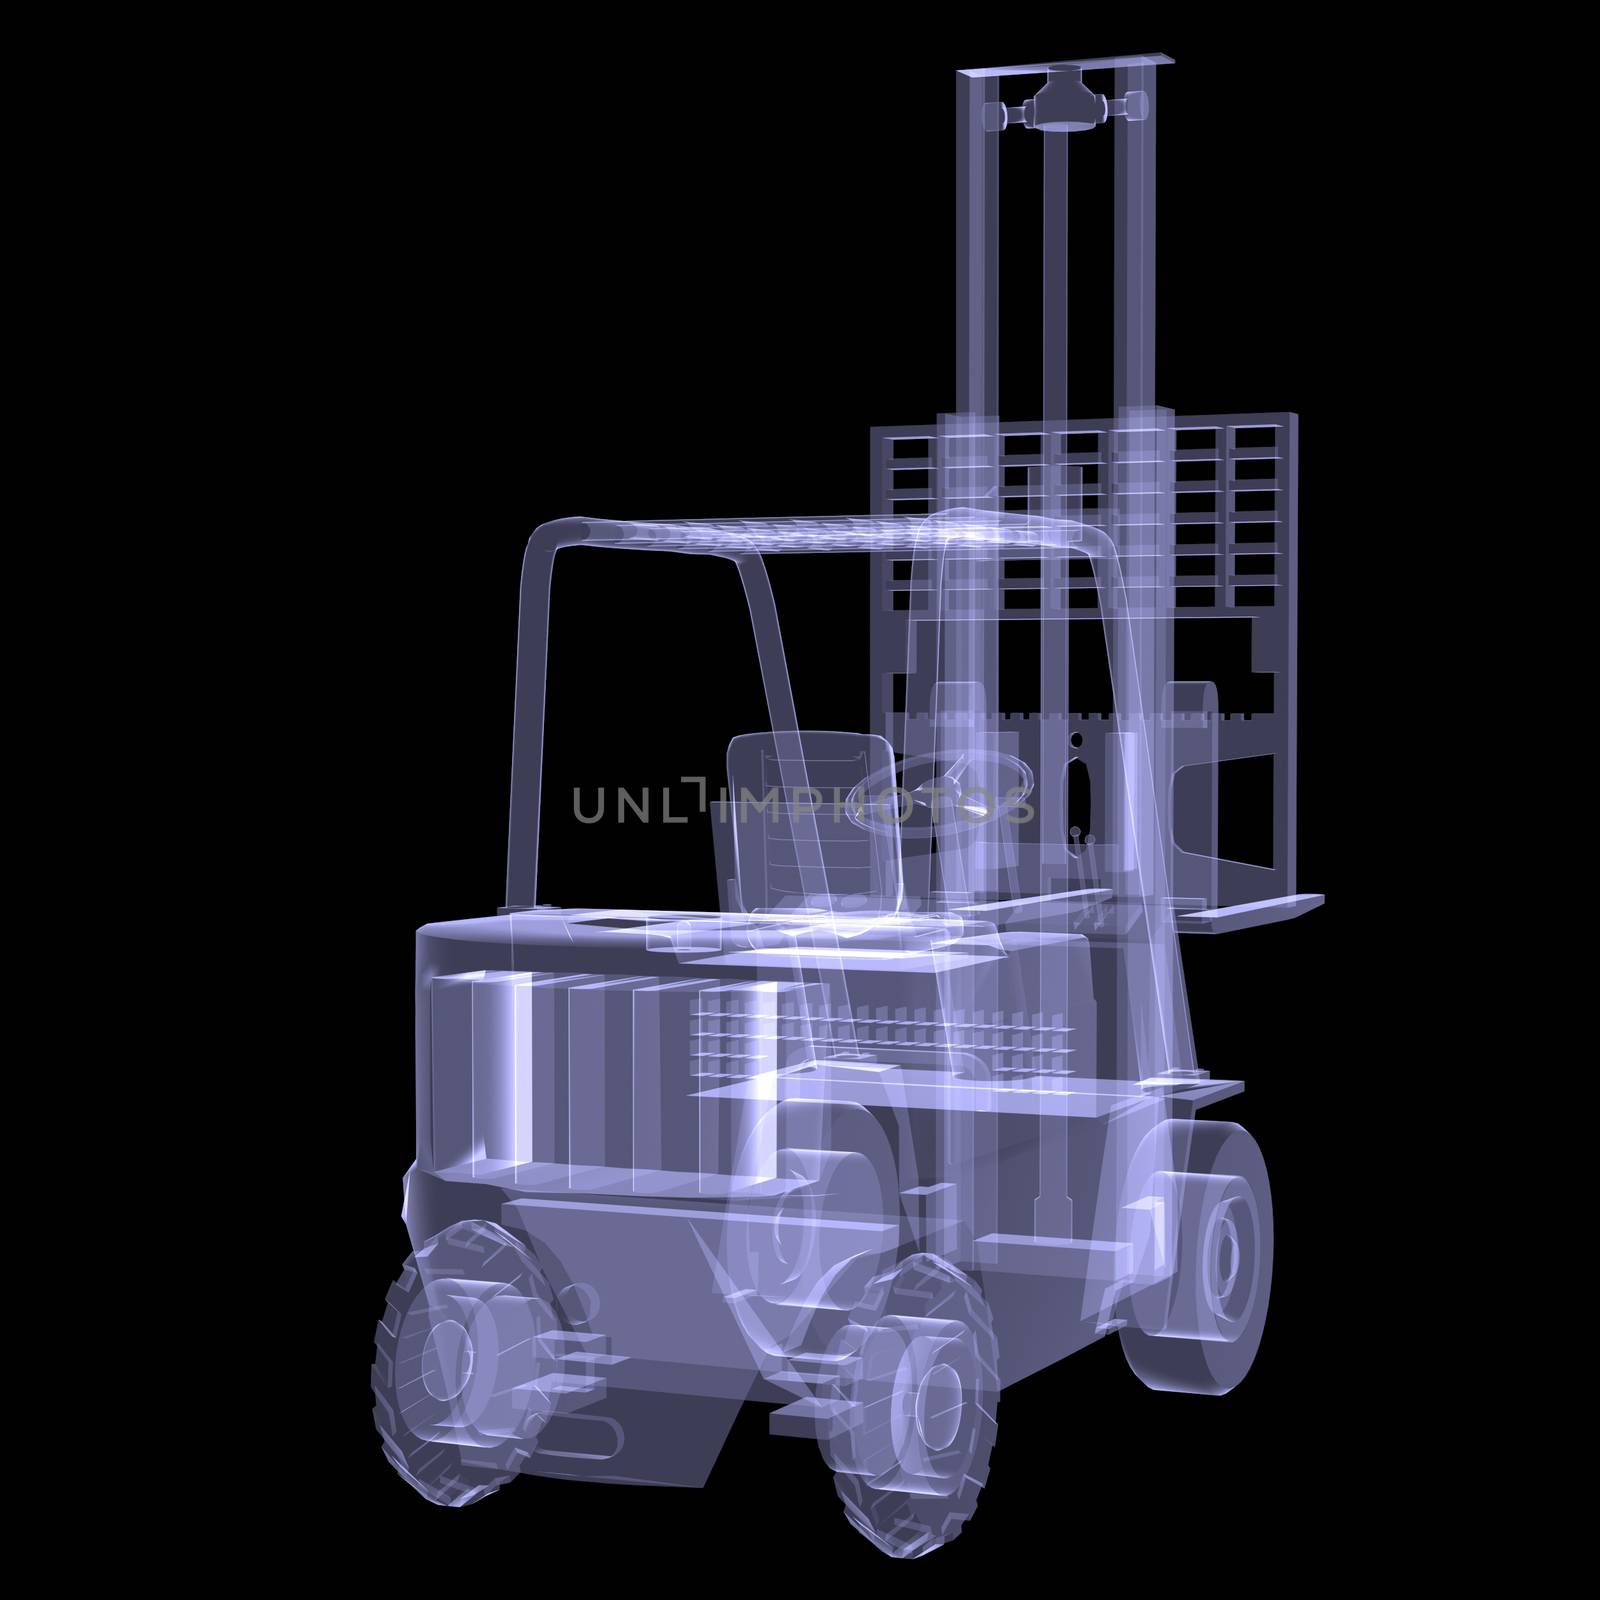 Loader. X-ray. 3d render isolated on a black background